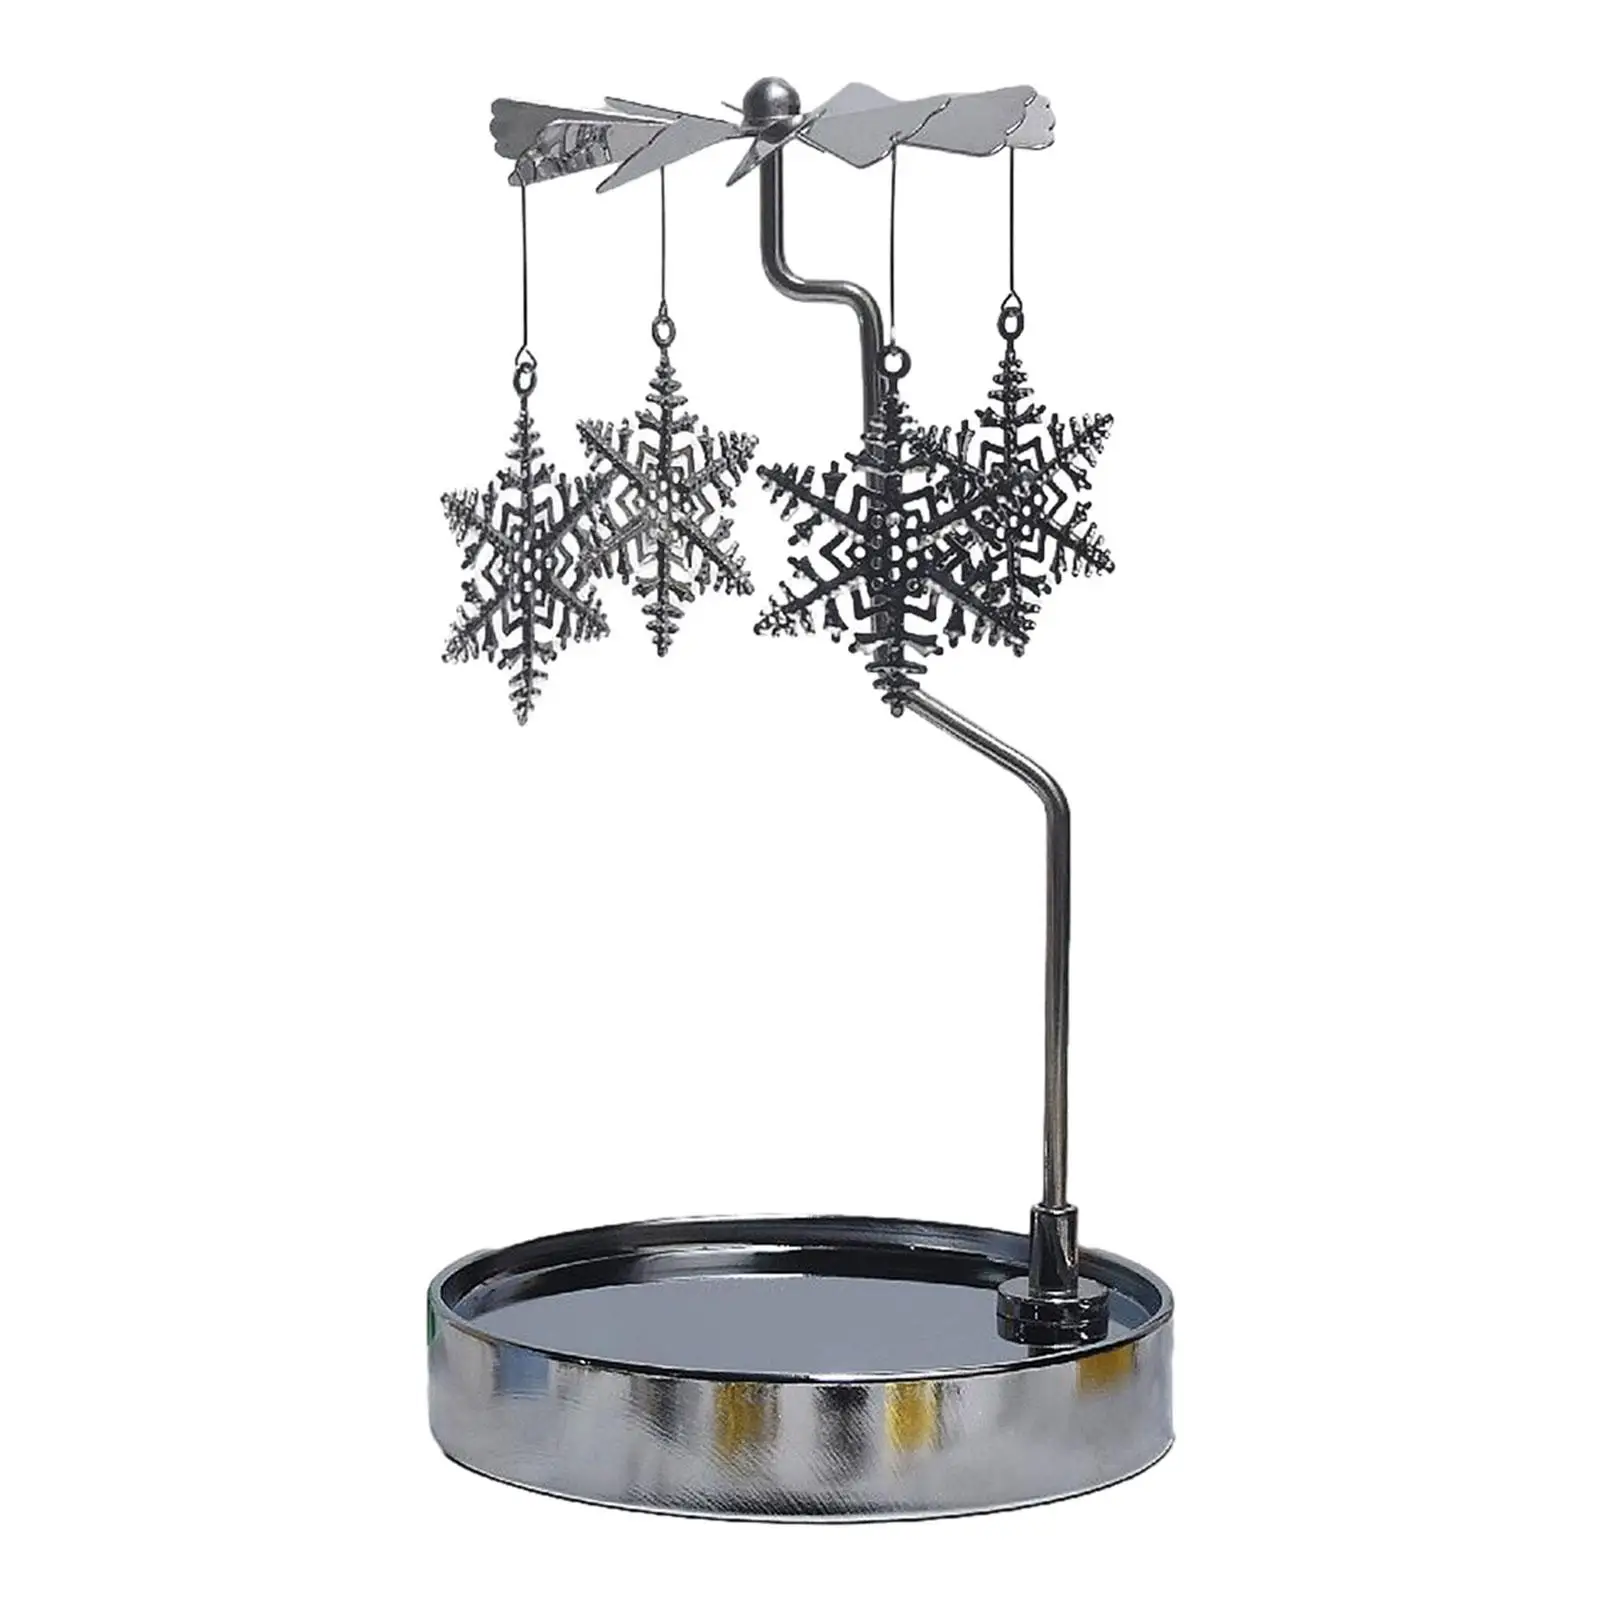 Tealight Candle Holders Metal Rotating Candle Holder Rotating Candle Holder for Home Table Valentines Day Dinner Wedding Party